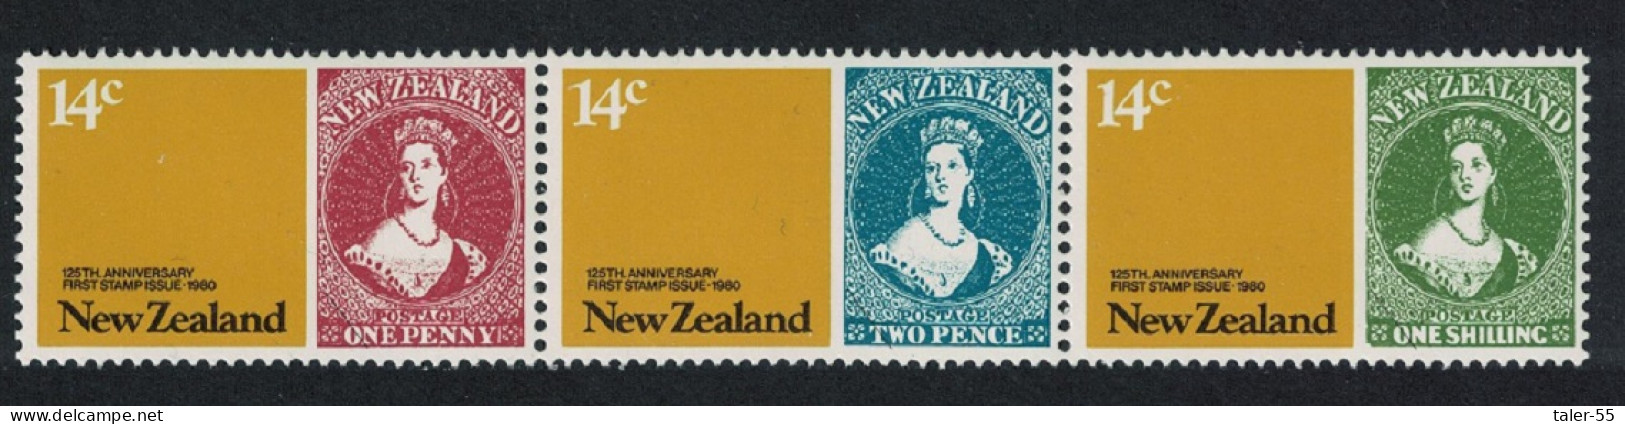 New Zealand 125th Anniversary Of Stamps Strip Of 3v 1980 MNH SG#1210-1212 - Ungebraucht